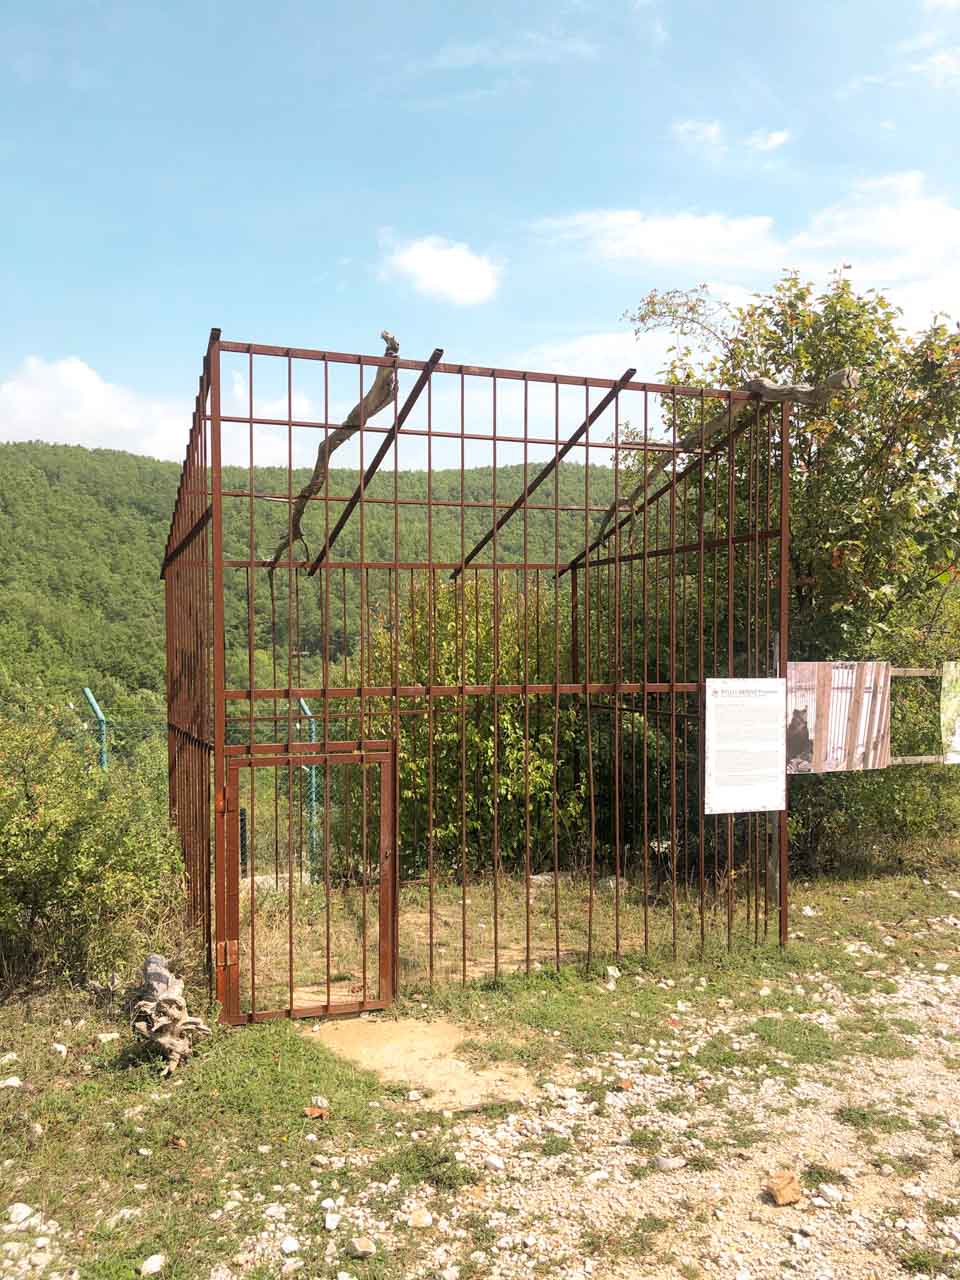 A cage in which restaurant bears used to be kept on display at the Pristina Bear Sanctuary